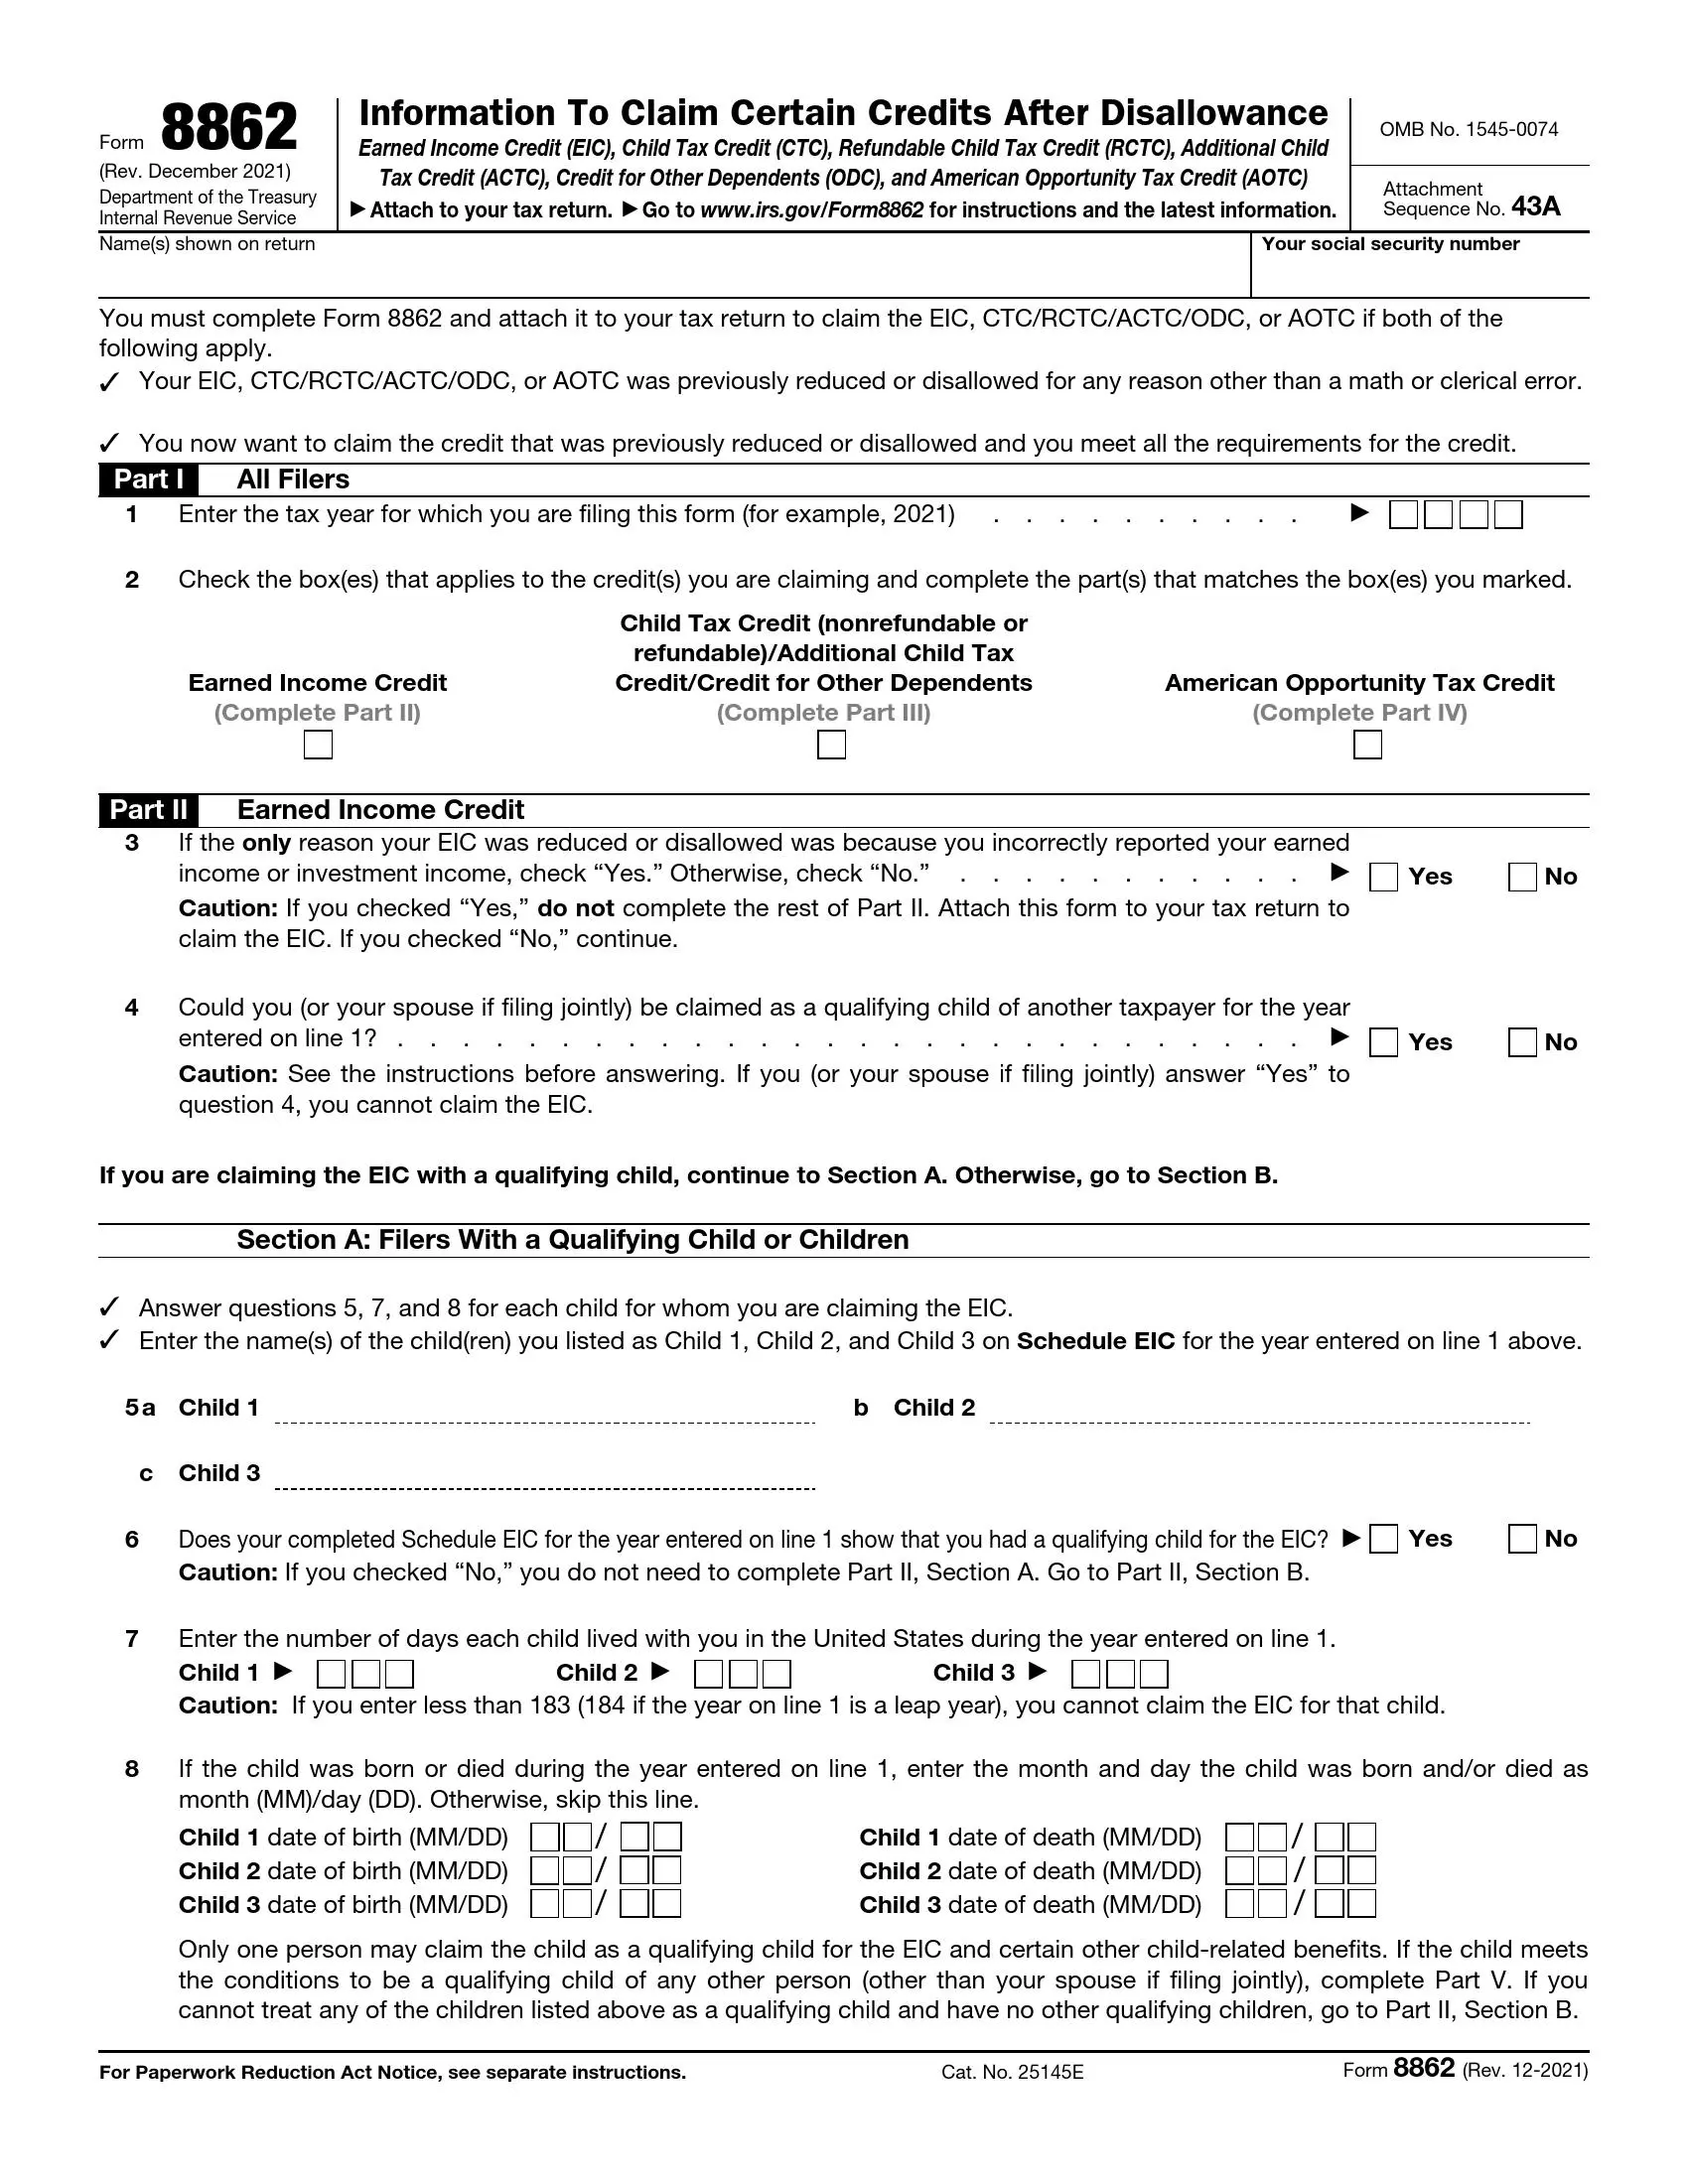 irs form 8862 rev 12 2021 preview